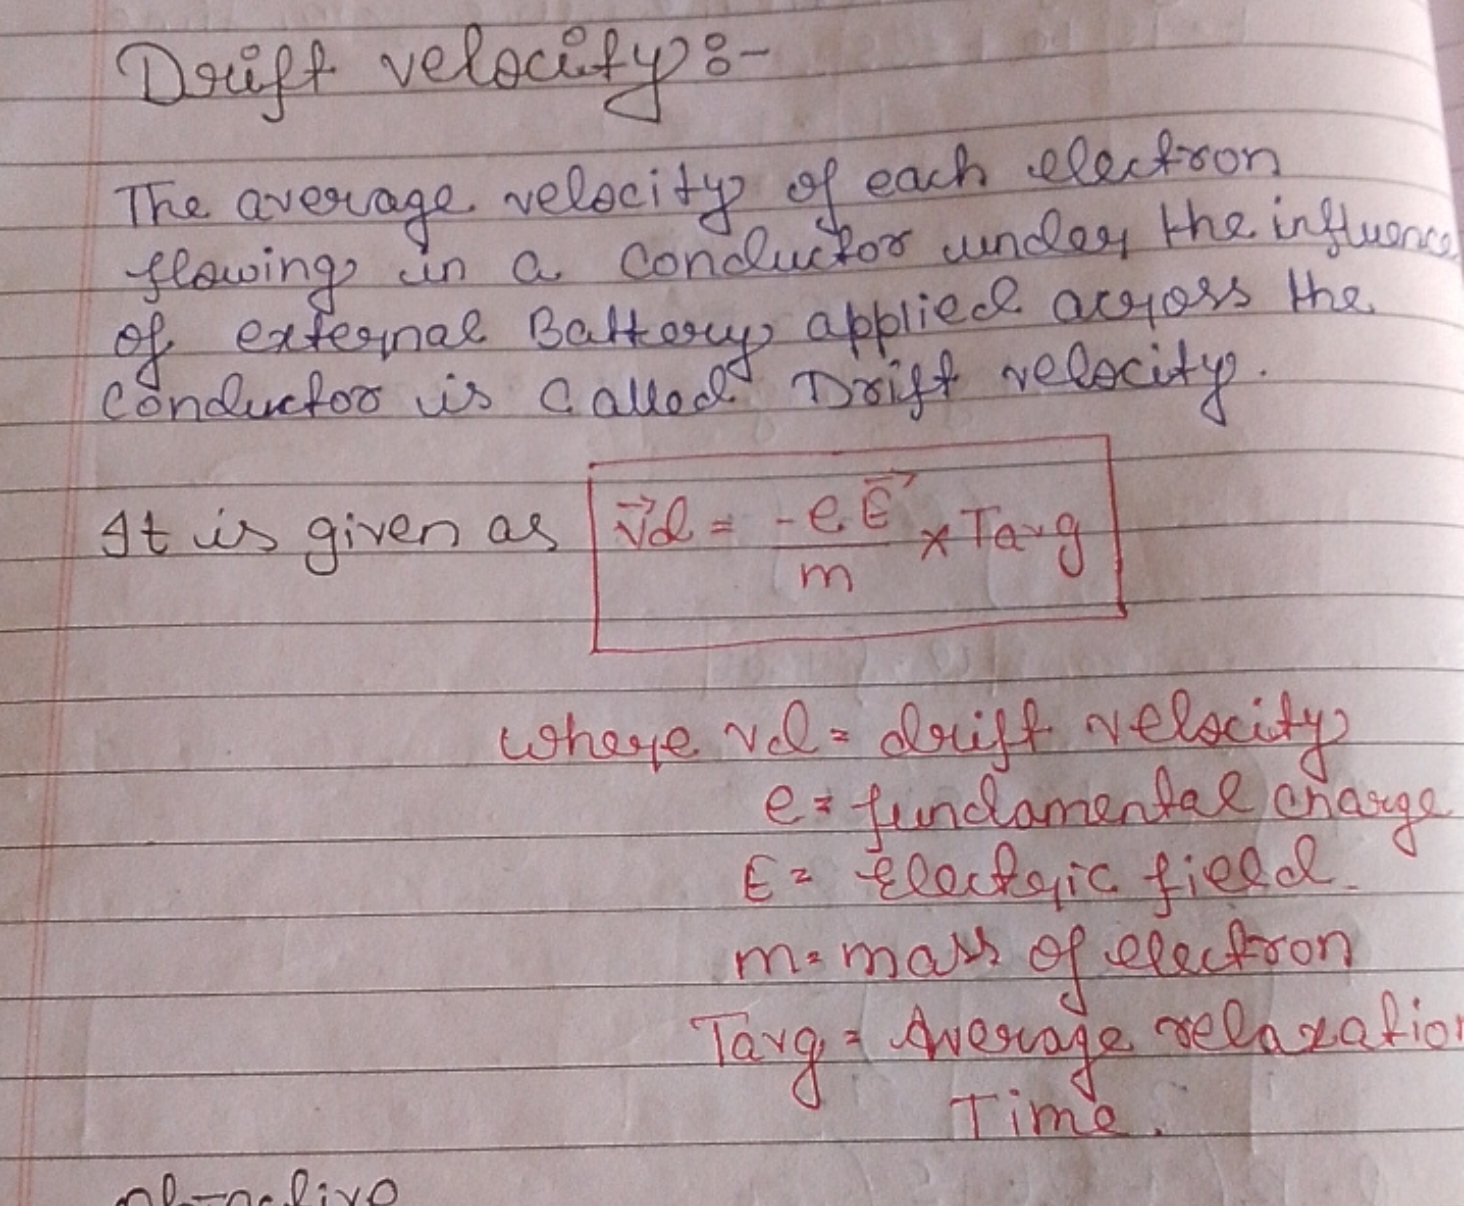 Drift velocity:-
The average velocity of each electron flowing in a co